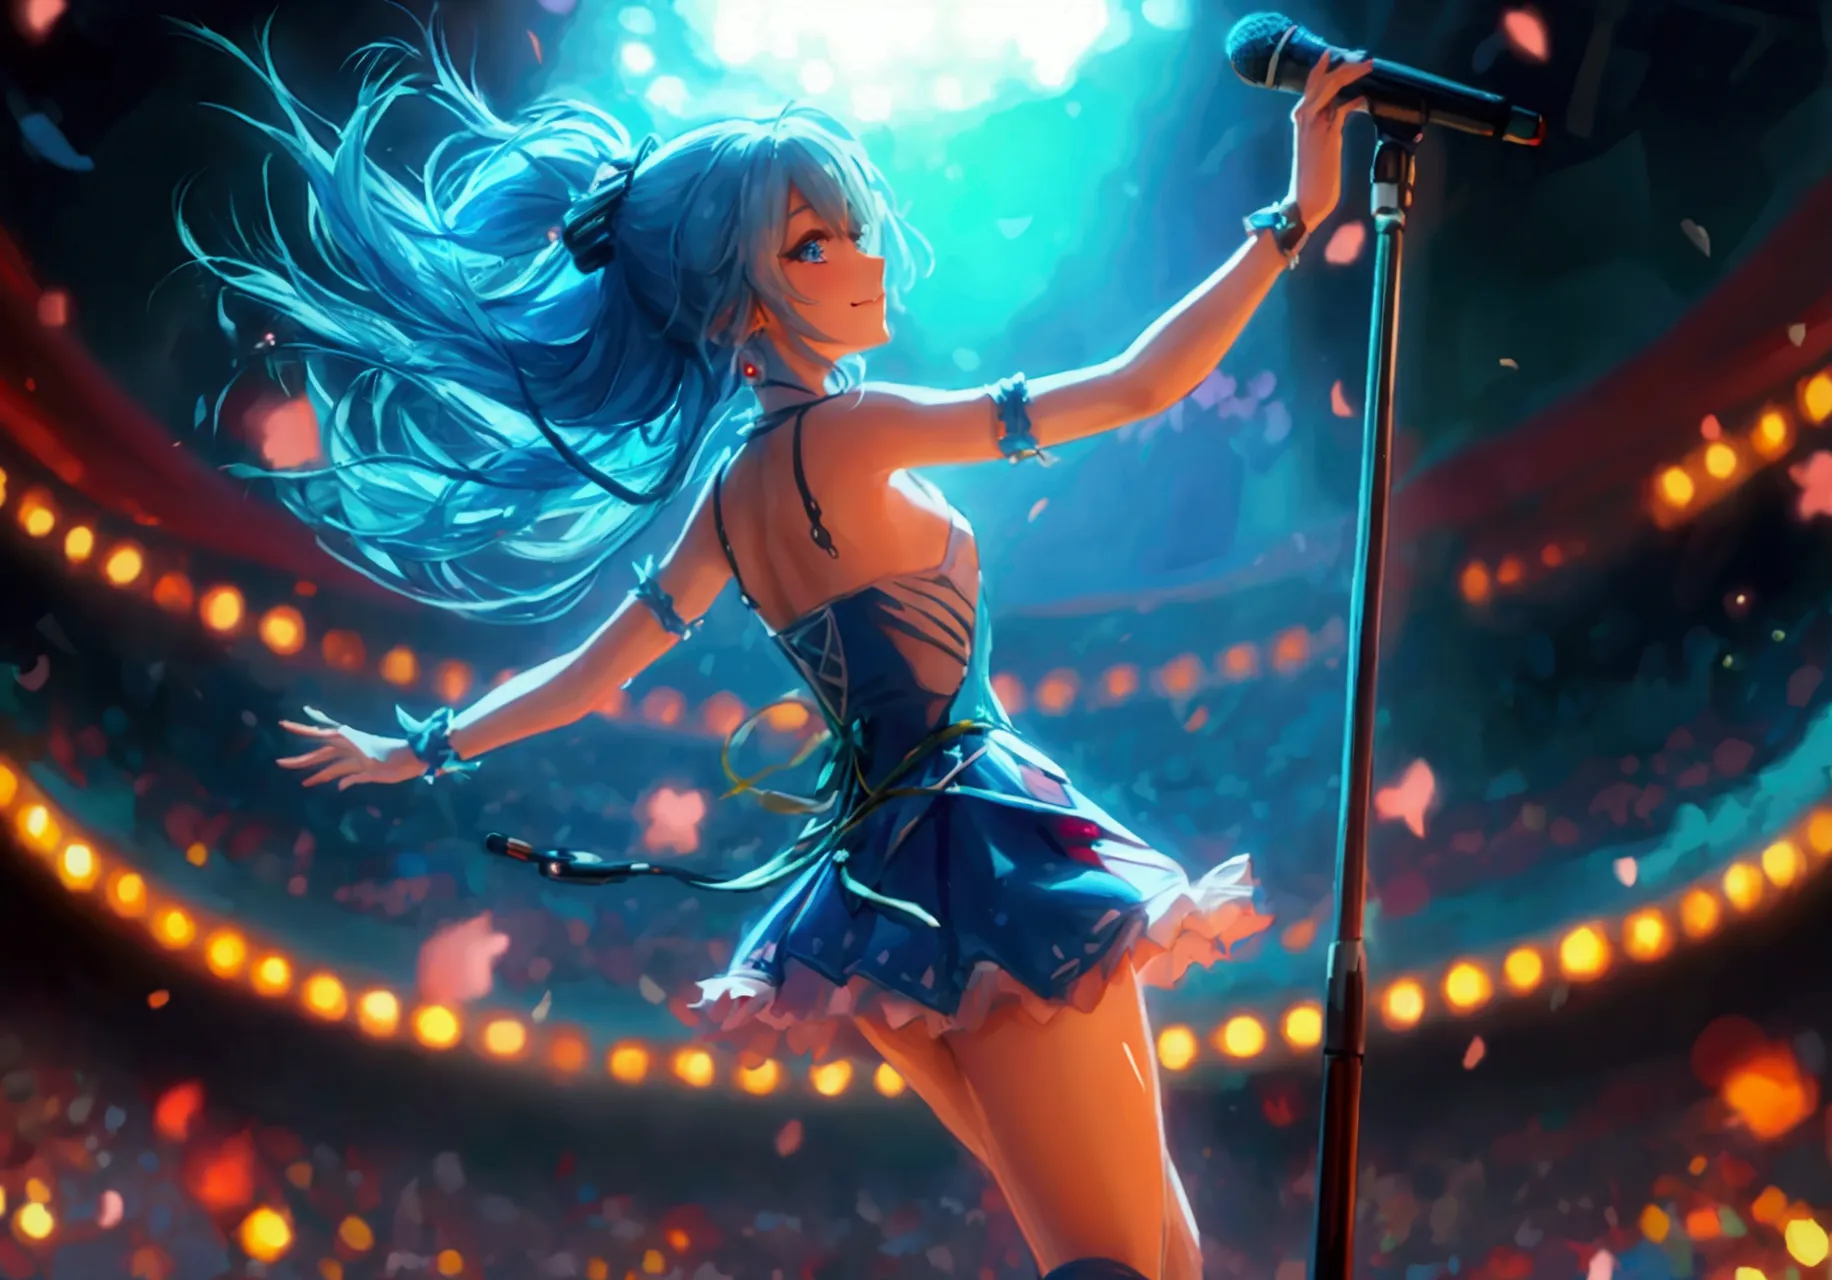 Animated woman with blue-green hair, arena, live music venue, singing, microphone, jumping,
Animation style, anime style, young ...